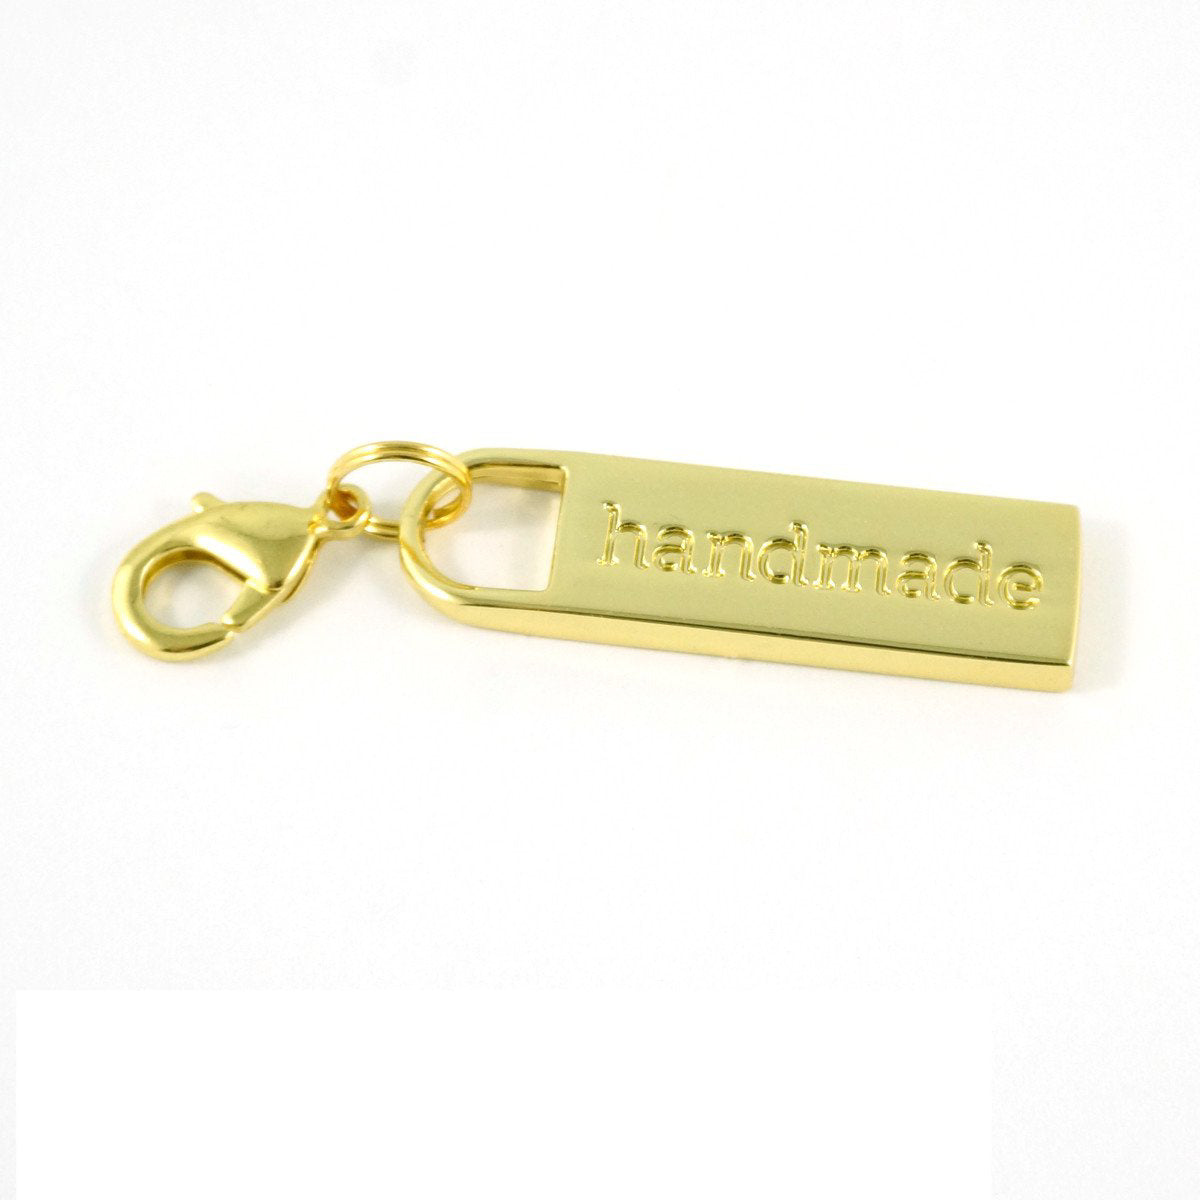 Mood Exclusive Italian Large Gold Rounded Edge Metal Zipper Pull - Zipper  Pulls - Zippers - Notions